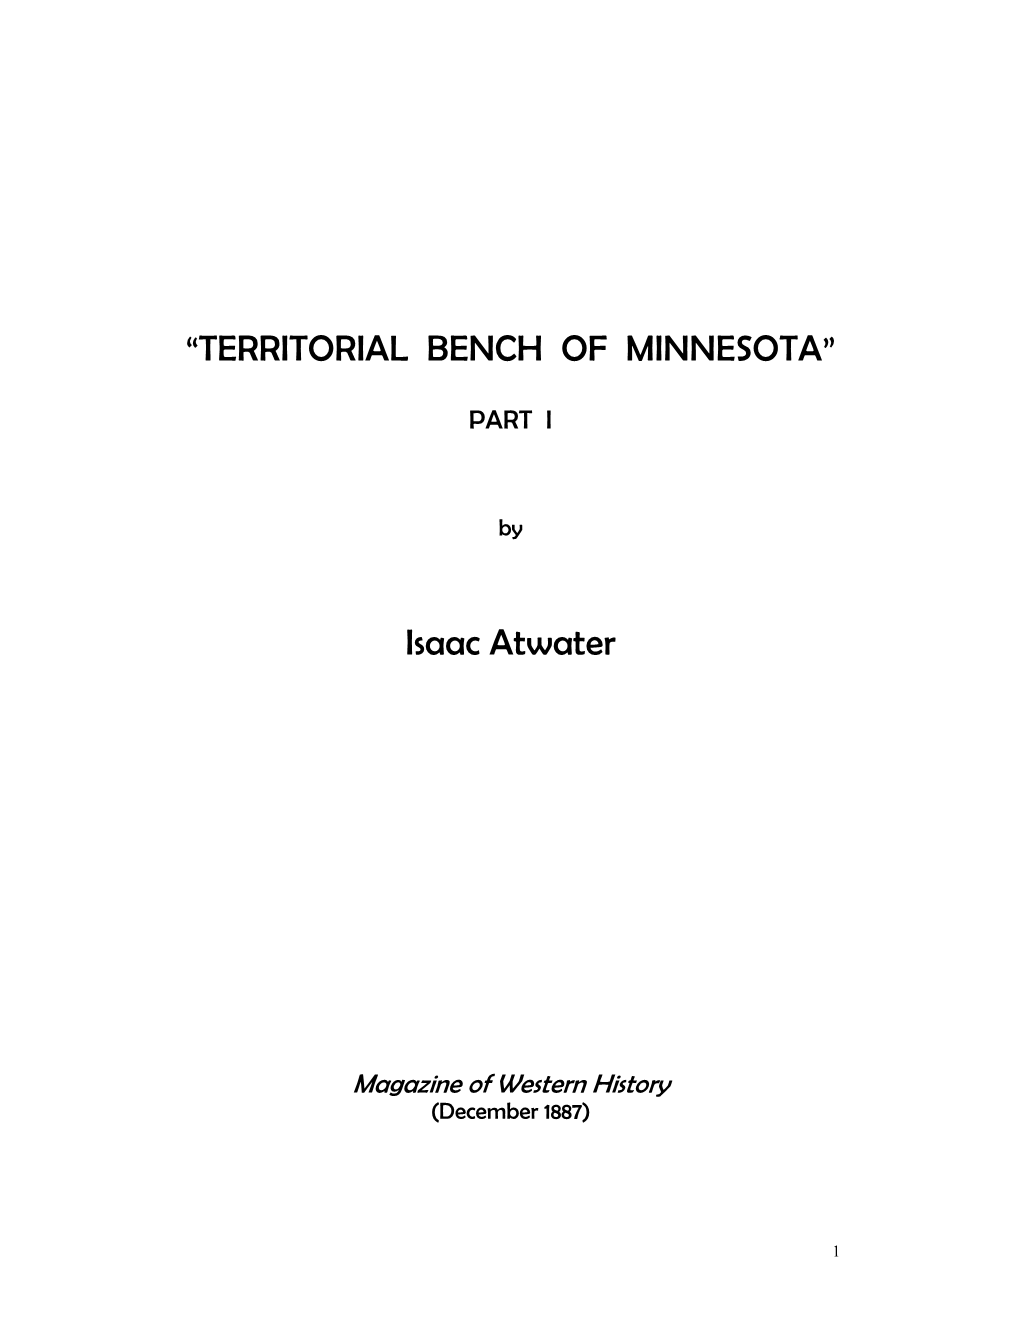 “TERRITORIAL BENCH of MINNESOTA” Isaac Atwater